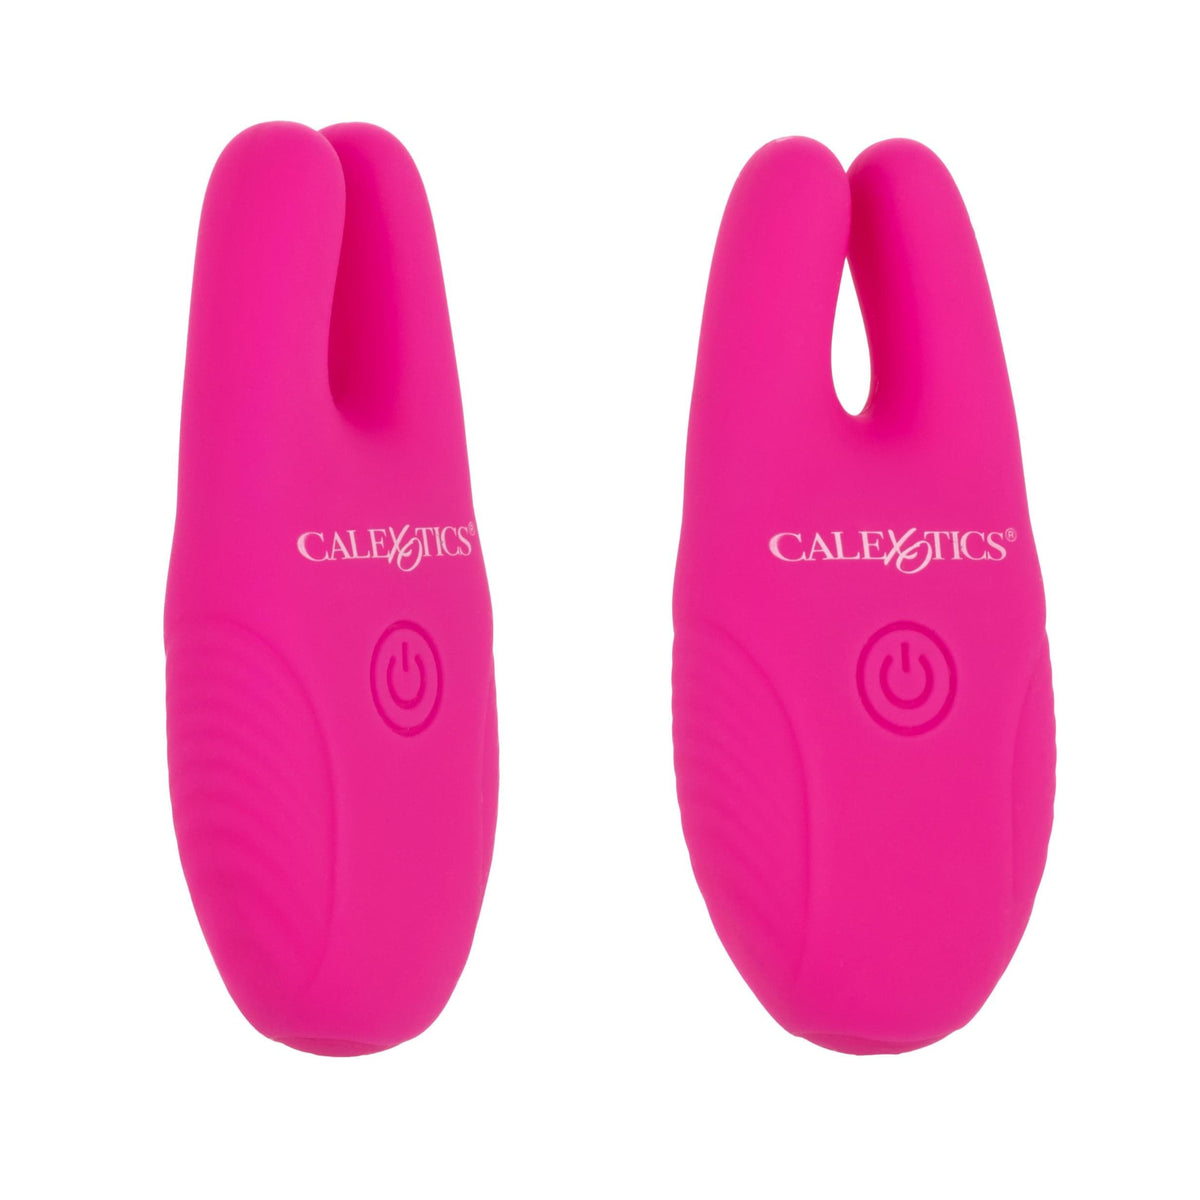 silicone remote nipple clamps pink